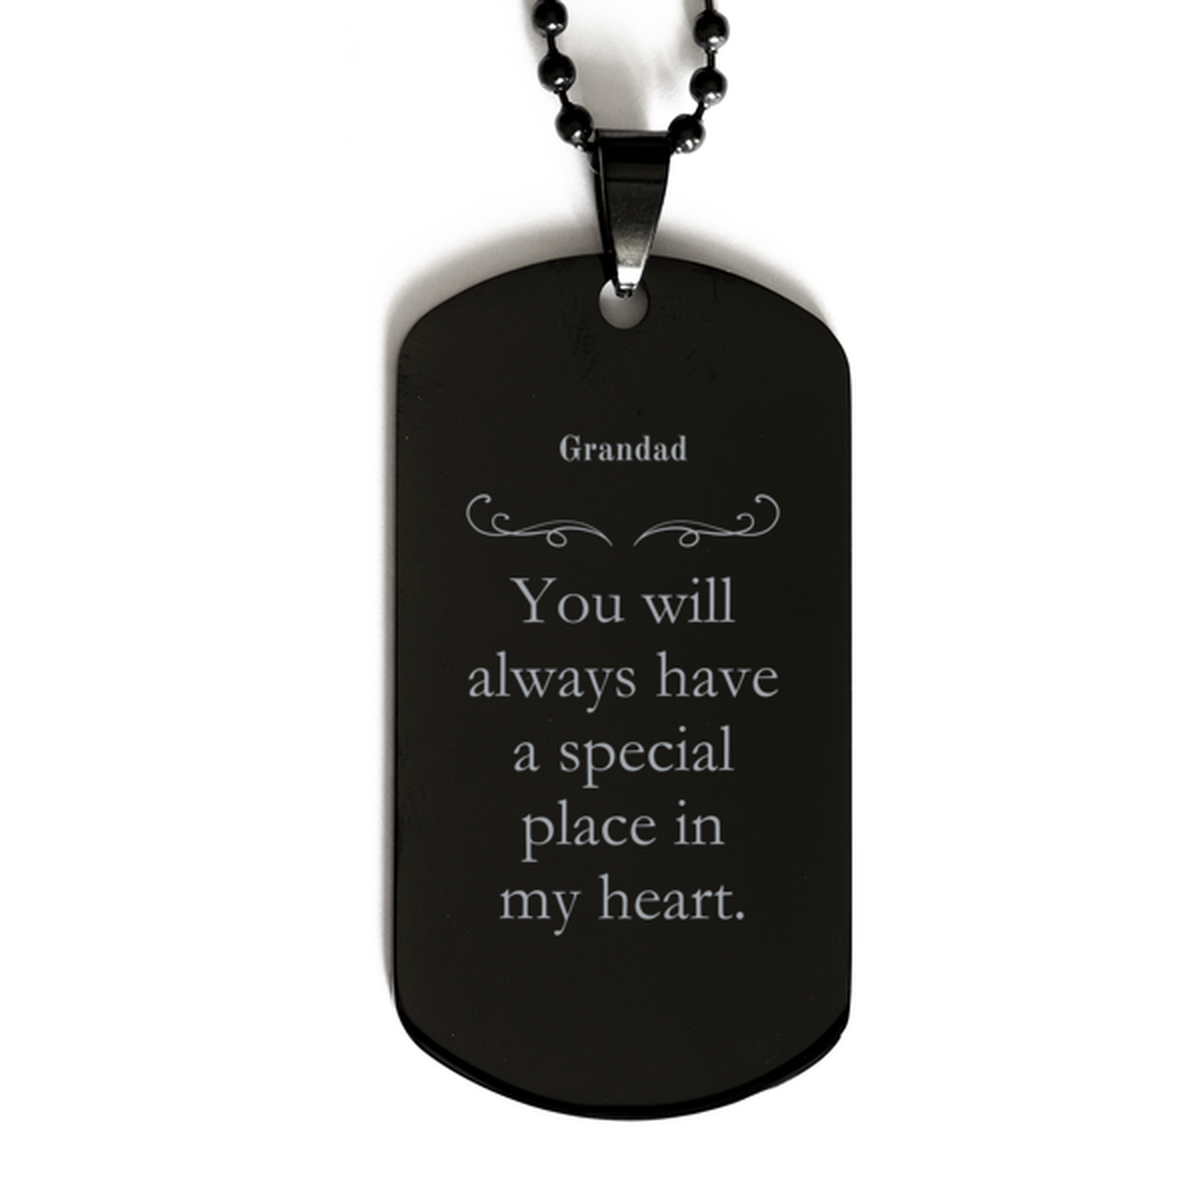 Unique Black Dog Tag Grandad Always in My Heart Gift for Grandfathers on Christmas and Birthdays